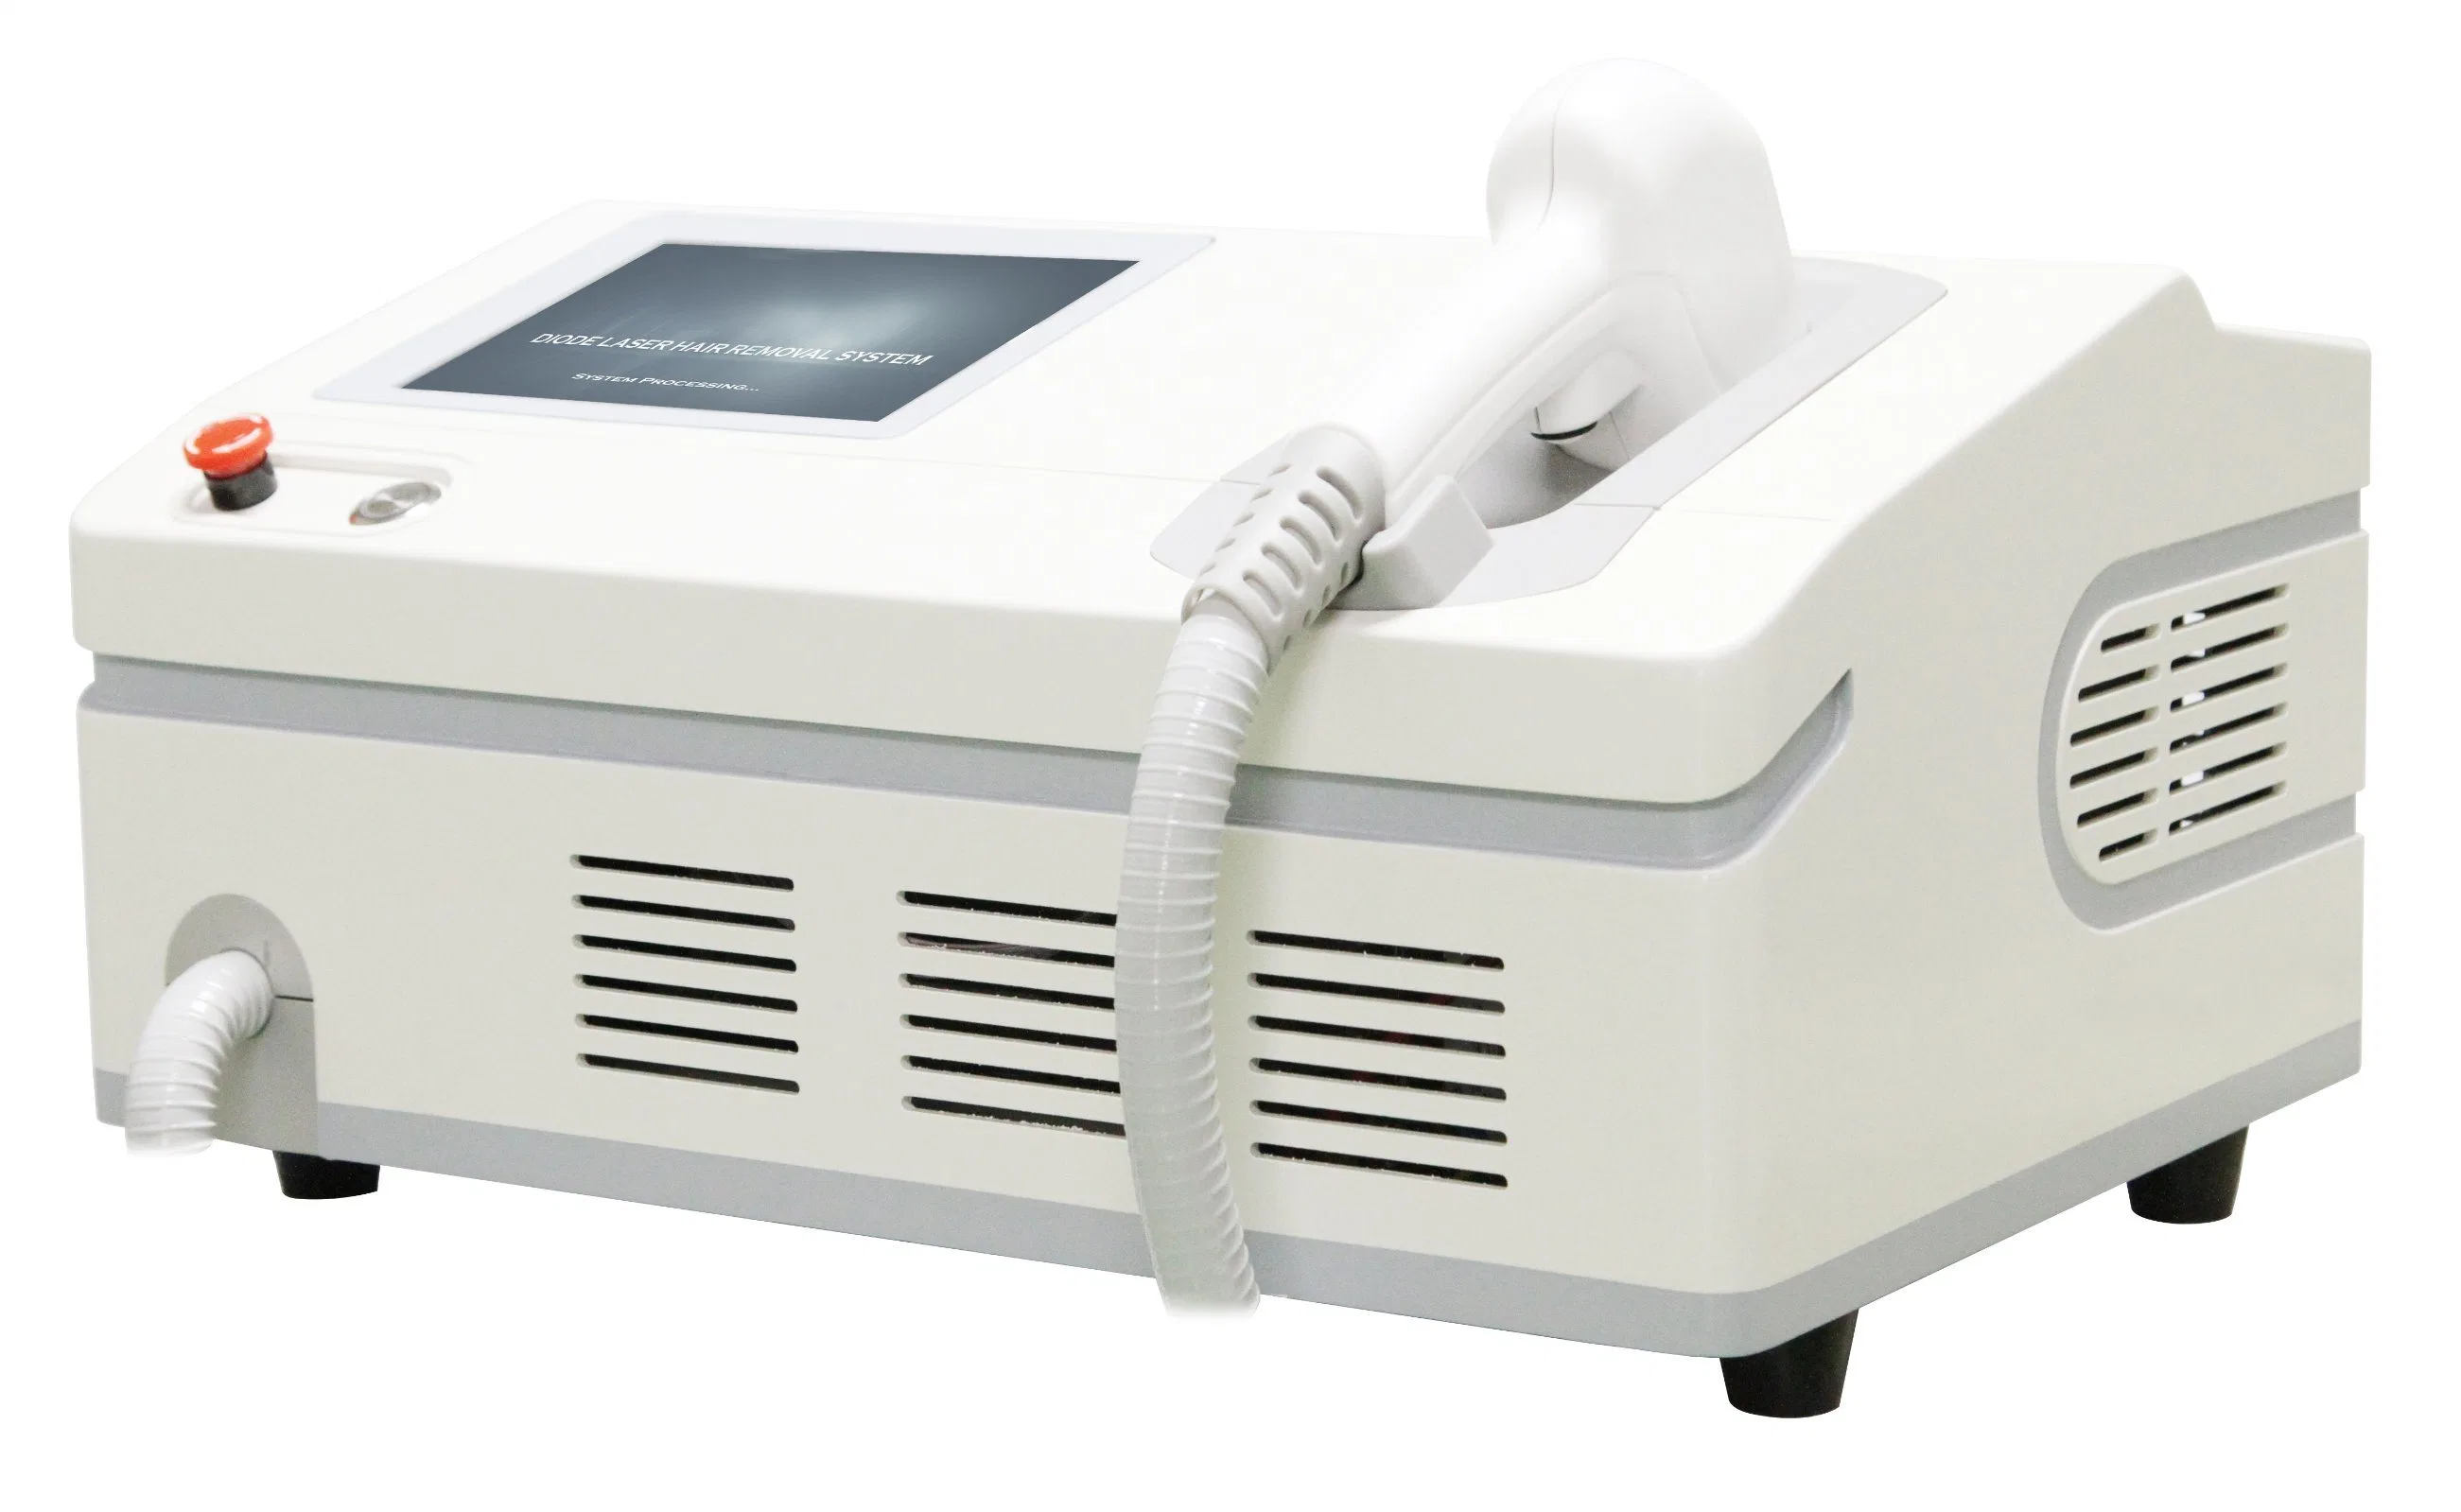 808nm Diode Laser Hair Removal Skin Rejuvenation Medical Equipment Pigment Removal Beauty Salon Equipment